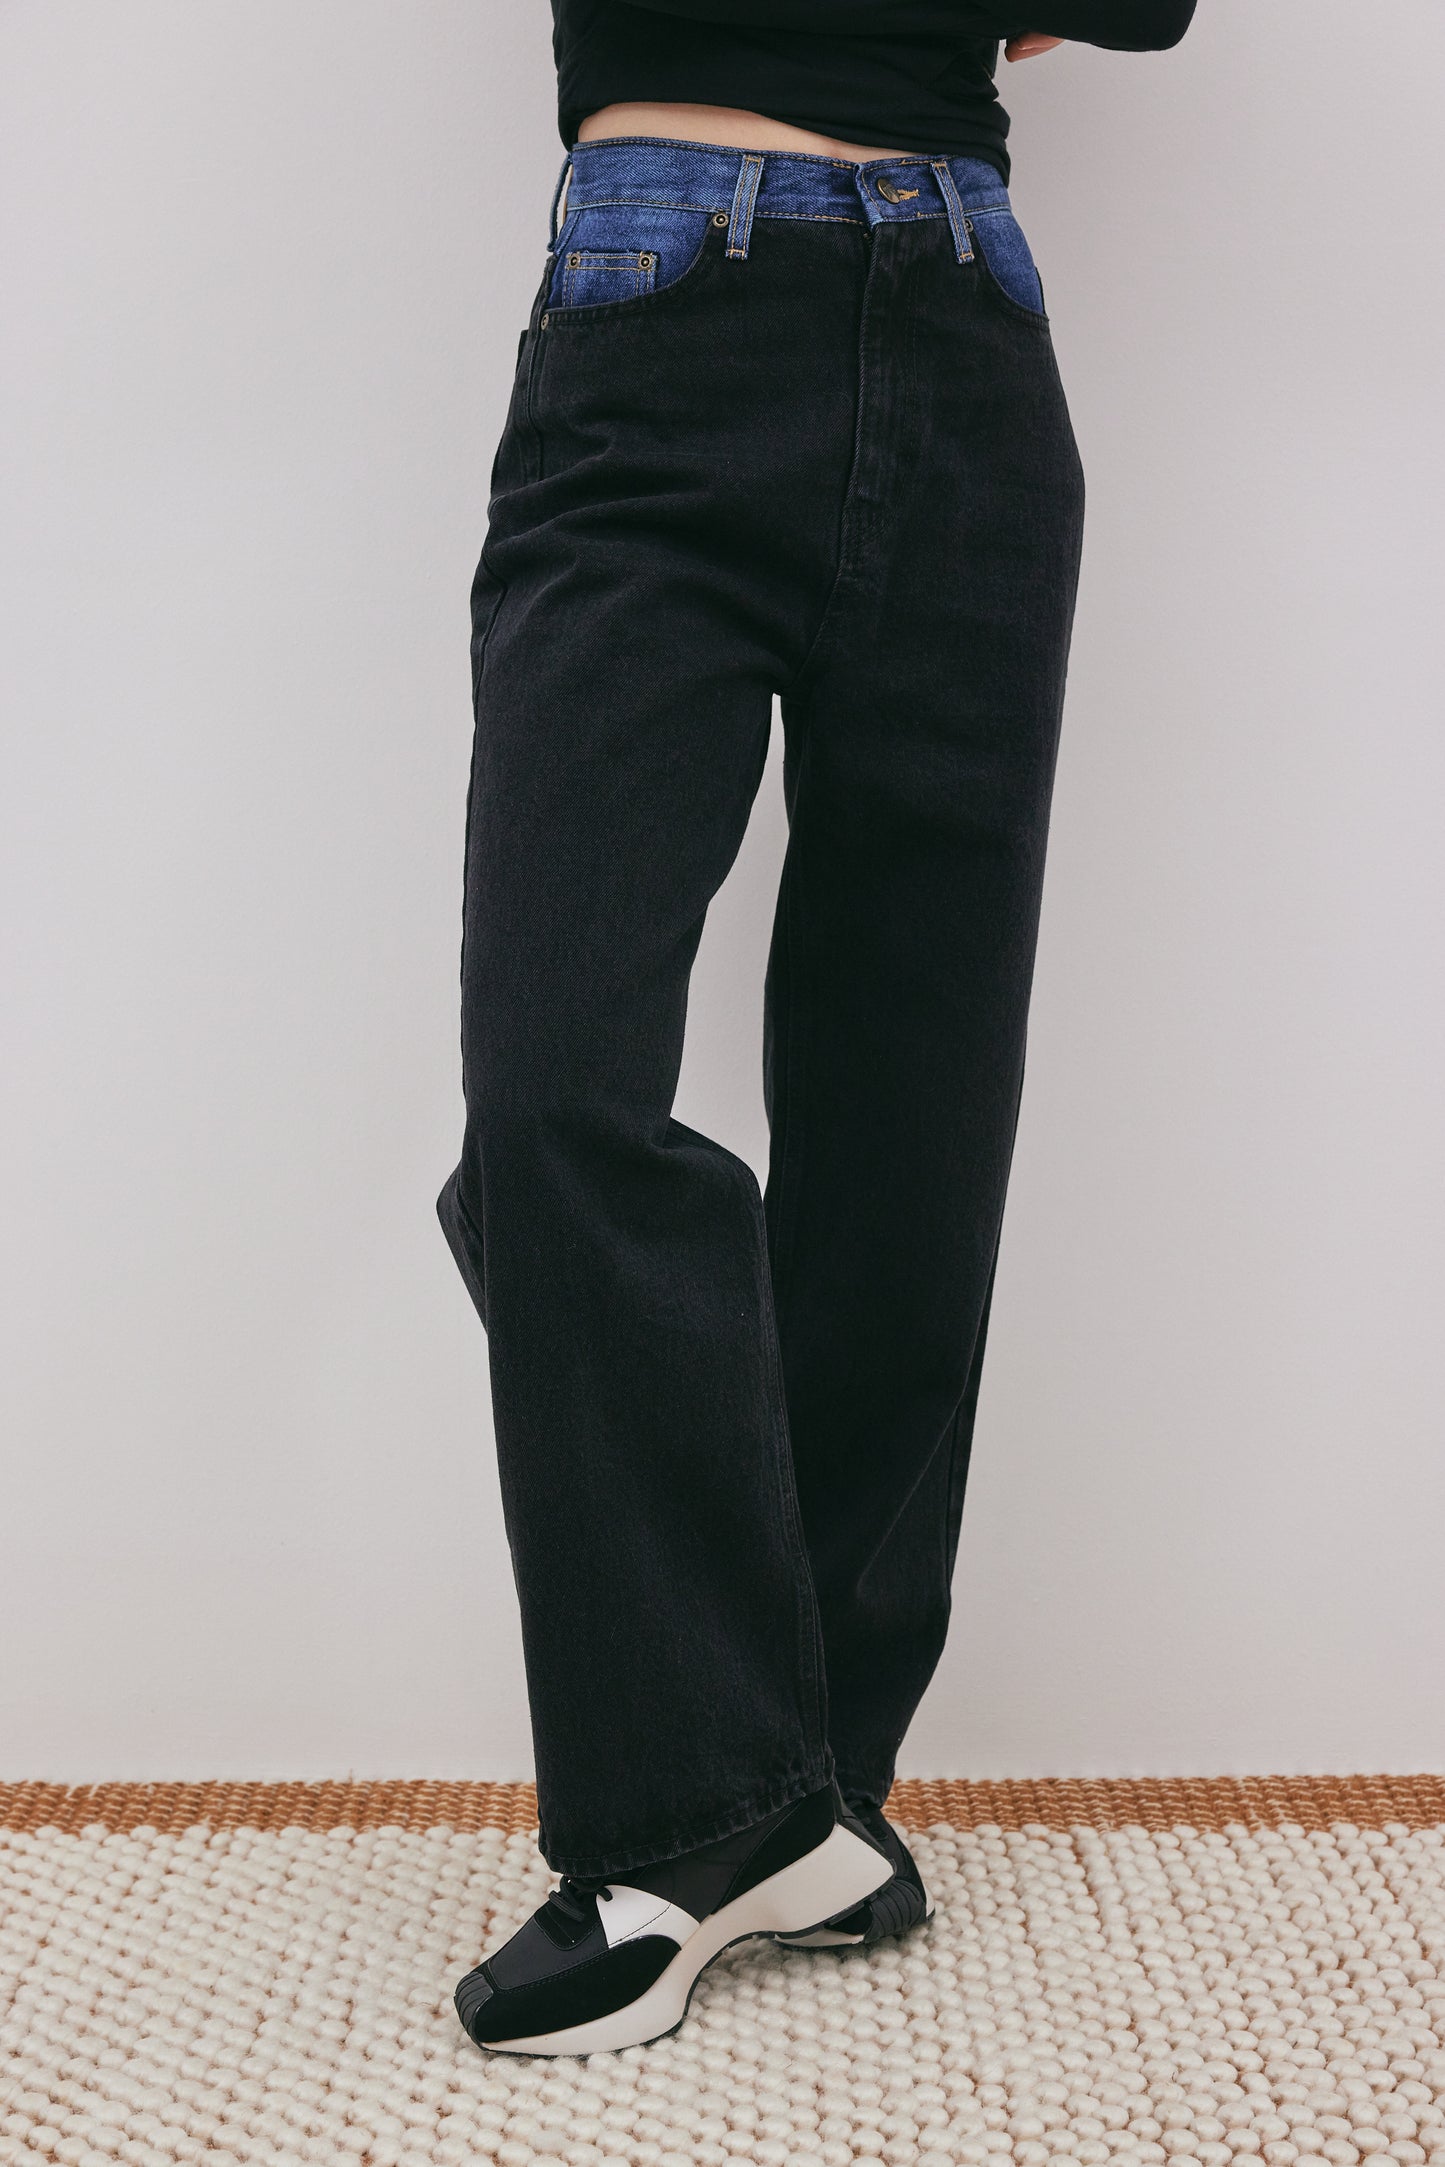 Contrast Spliced Jeans, Charcoal & Blue